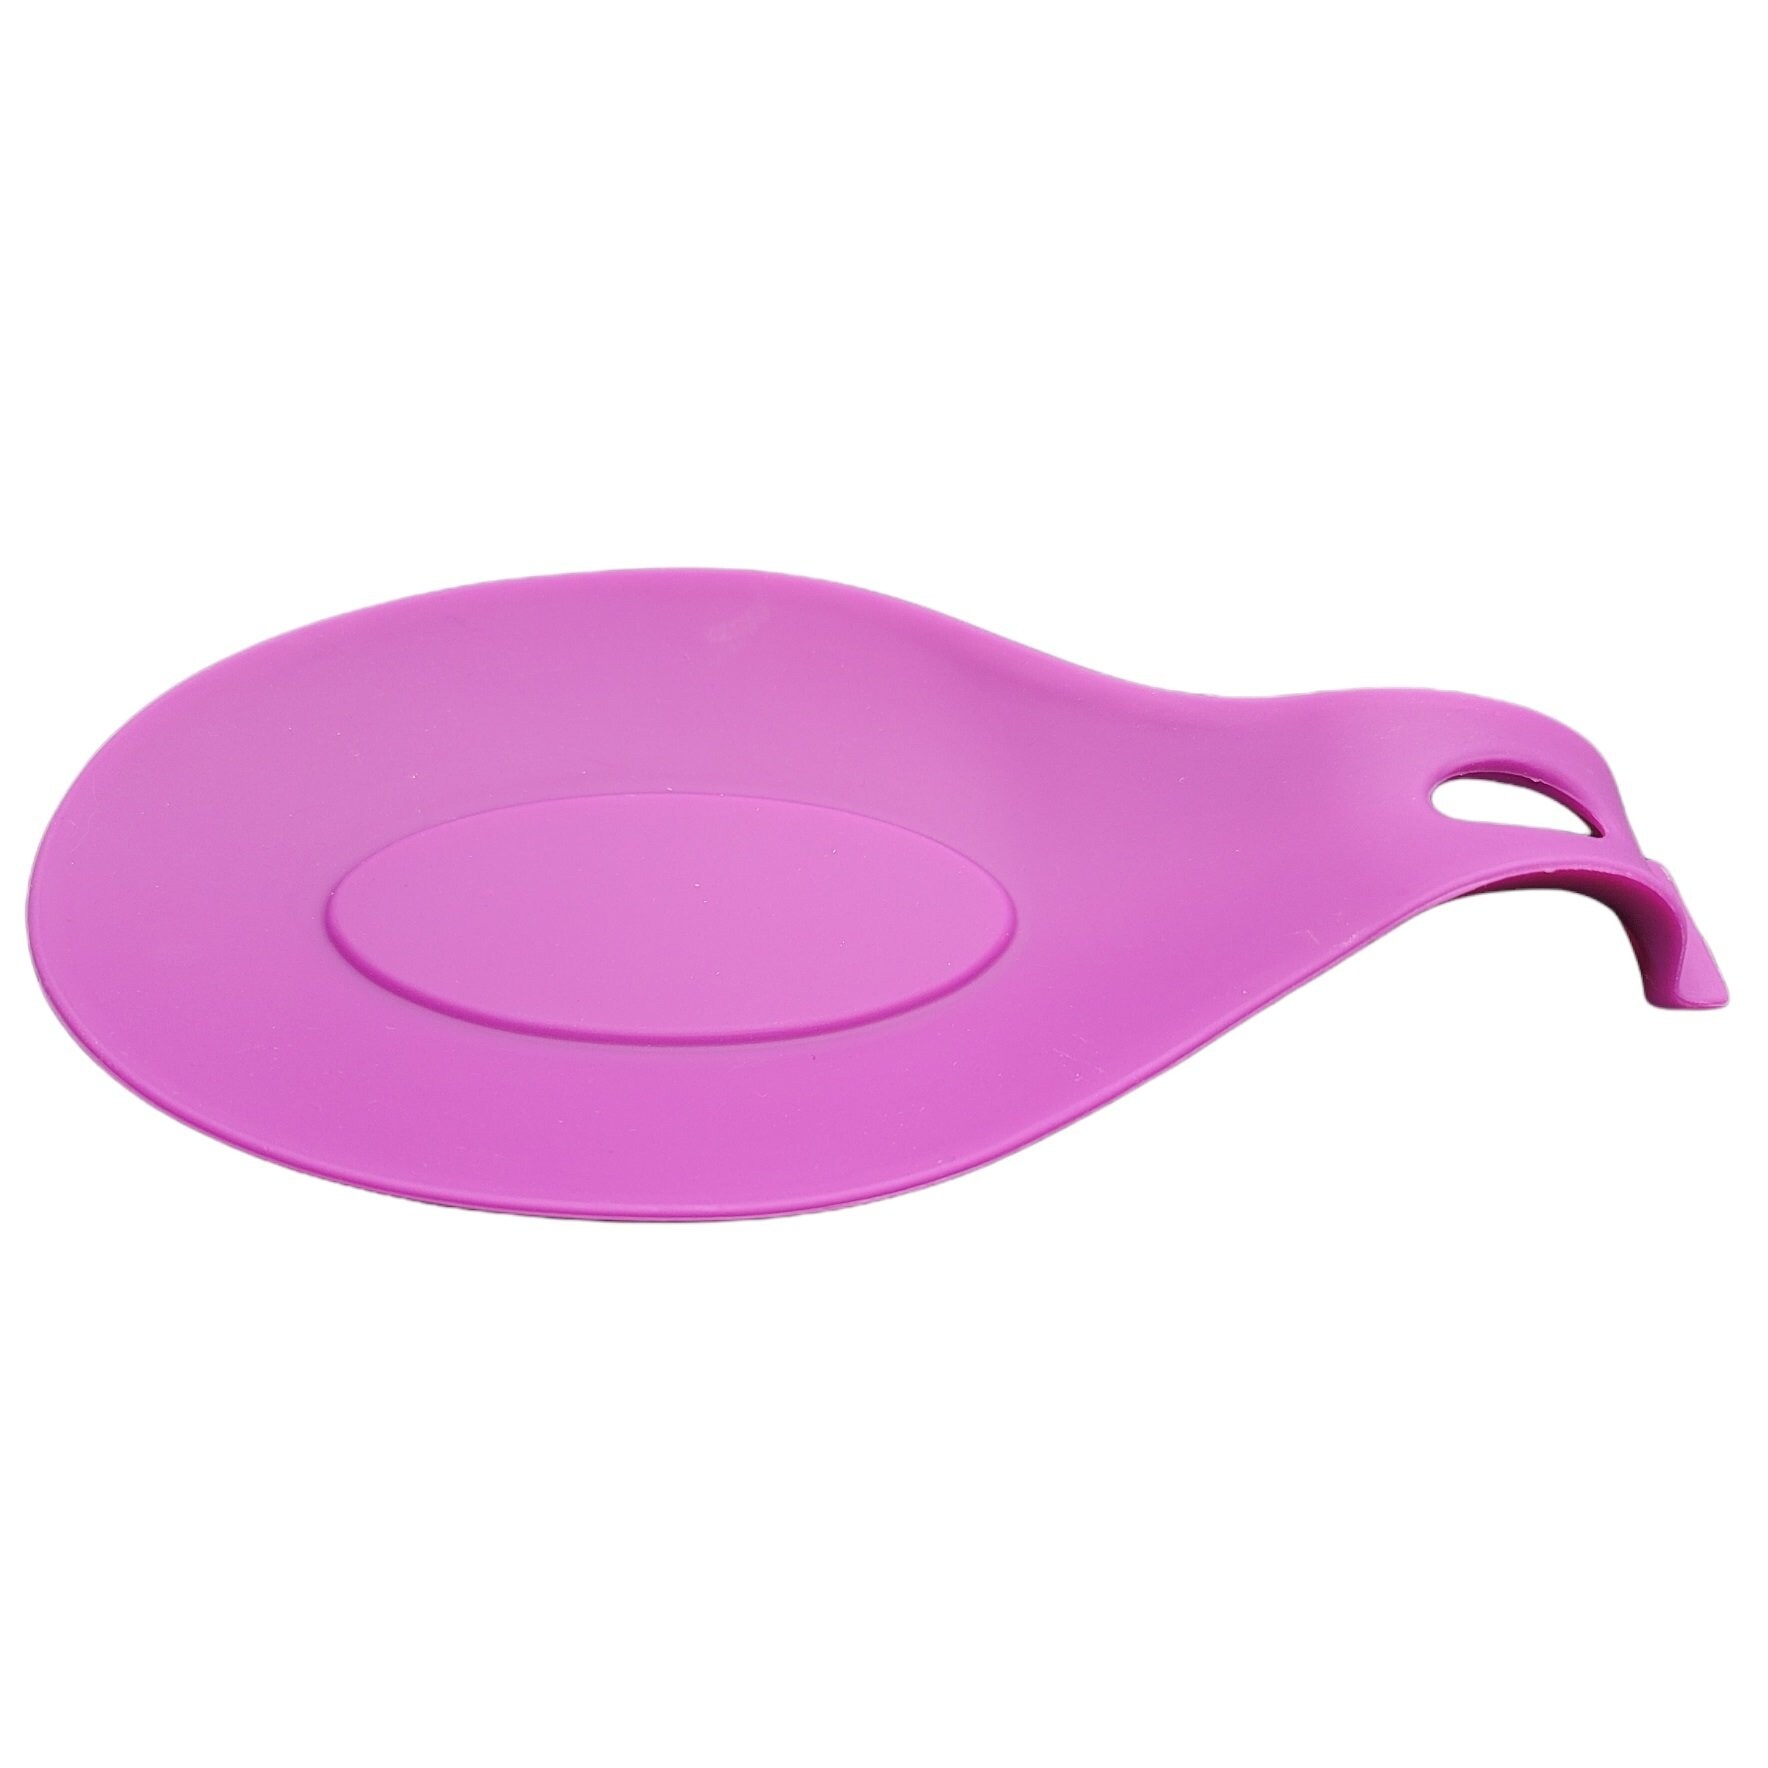 https://ak1.ostkcdn.com/images/products/is/images/direct/b30394e464b0d27f4d10f084e34e64cd1a1ed761/Handy-Housewares-Jumbo-Flexible-Silicone-Spoon-Rest%2C-Heat-Resistant-Stove-Top-Kitchen-Utensil-Drip-Pad.jpg